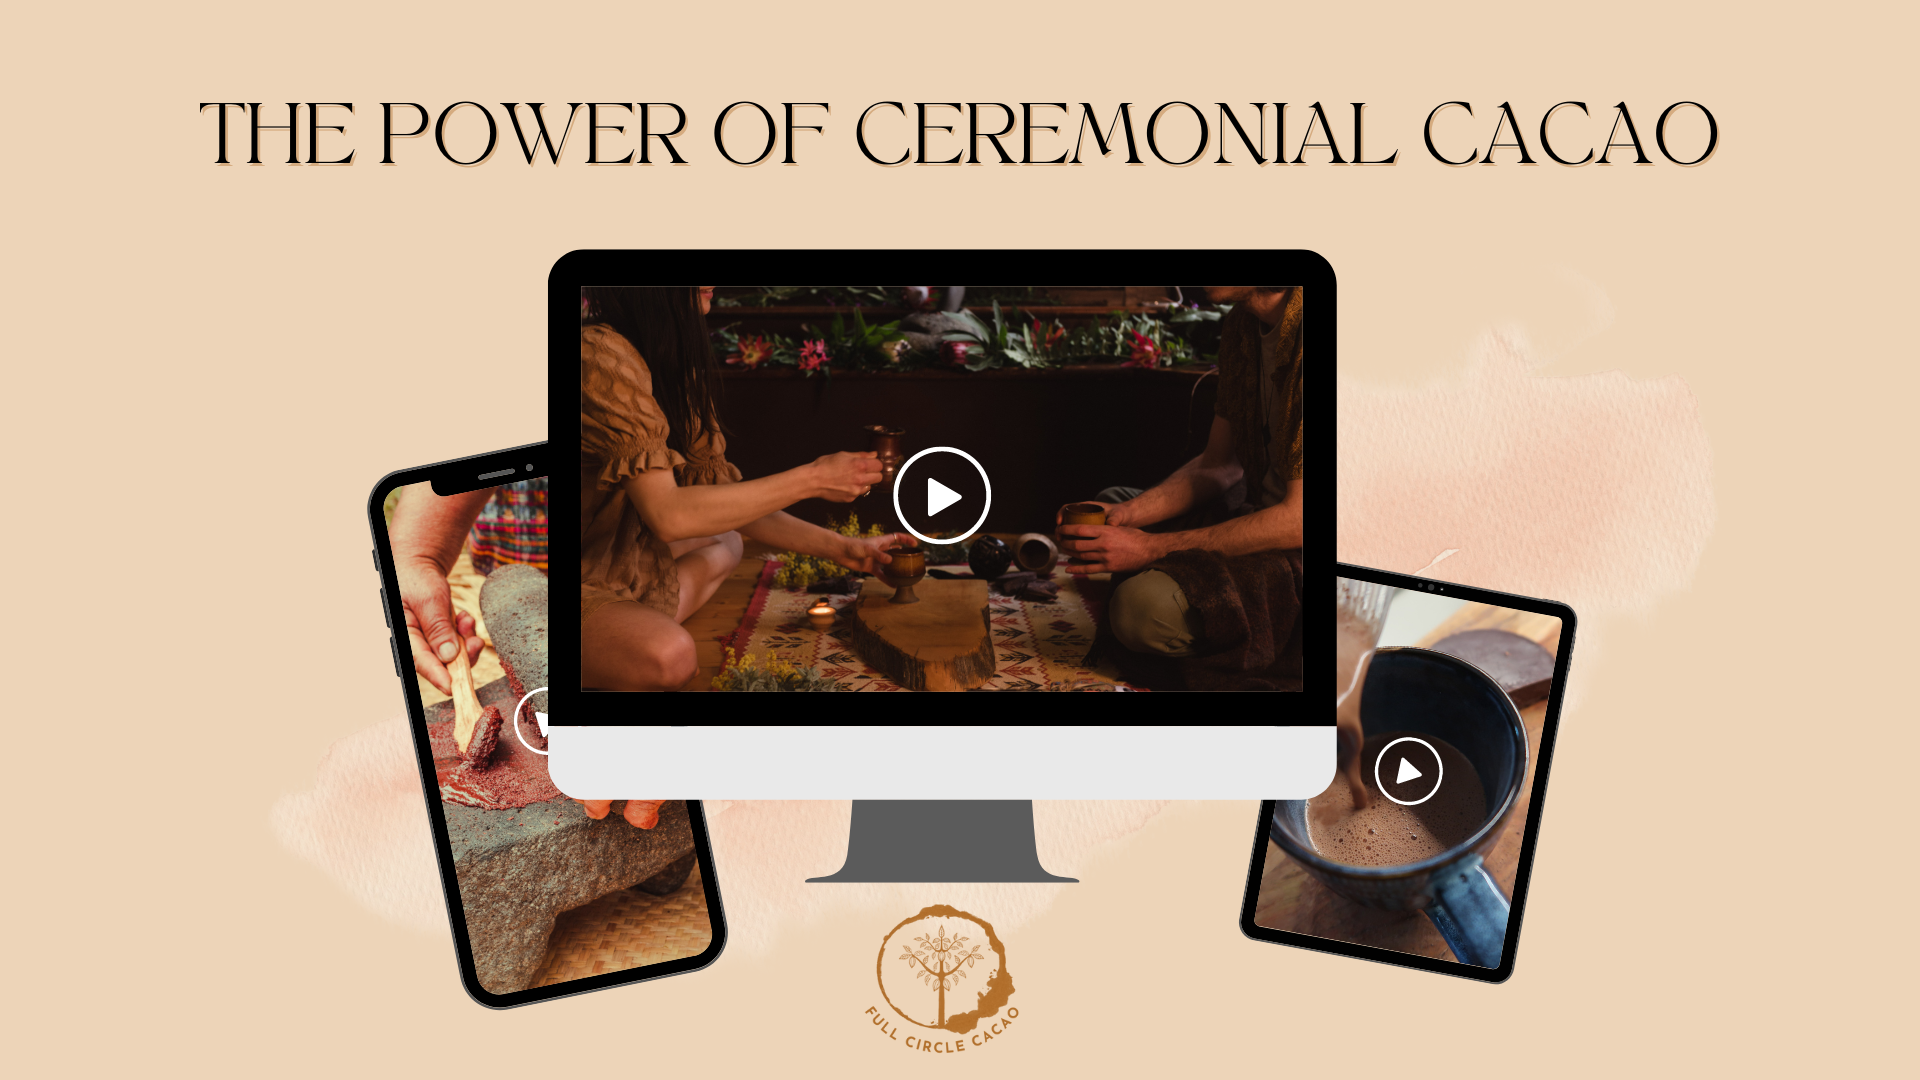 The Power of Ceremonial Cacao Course